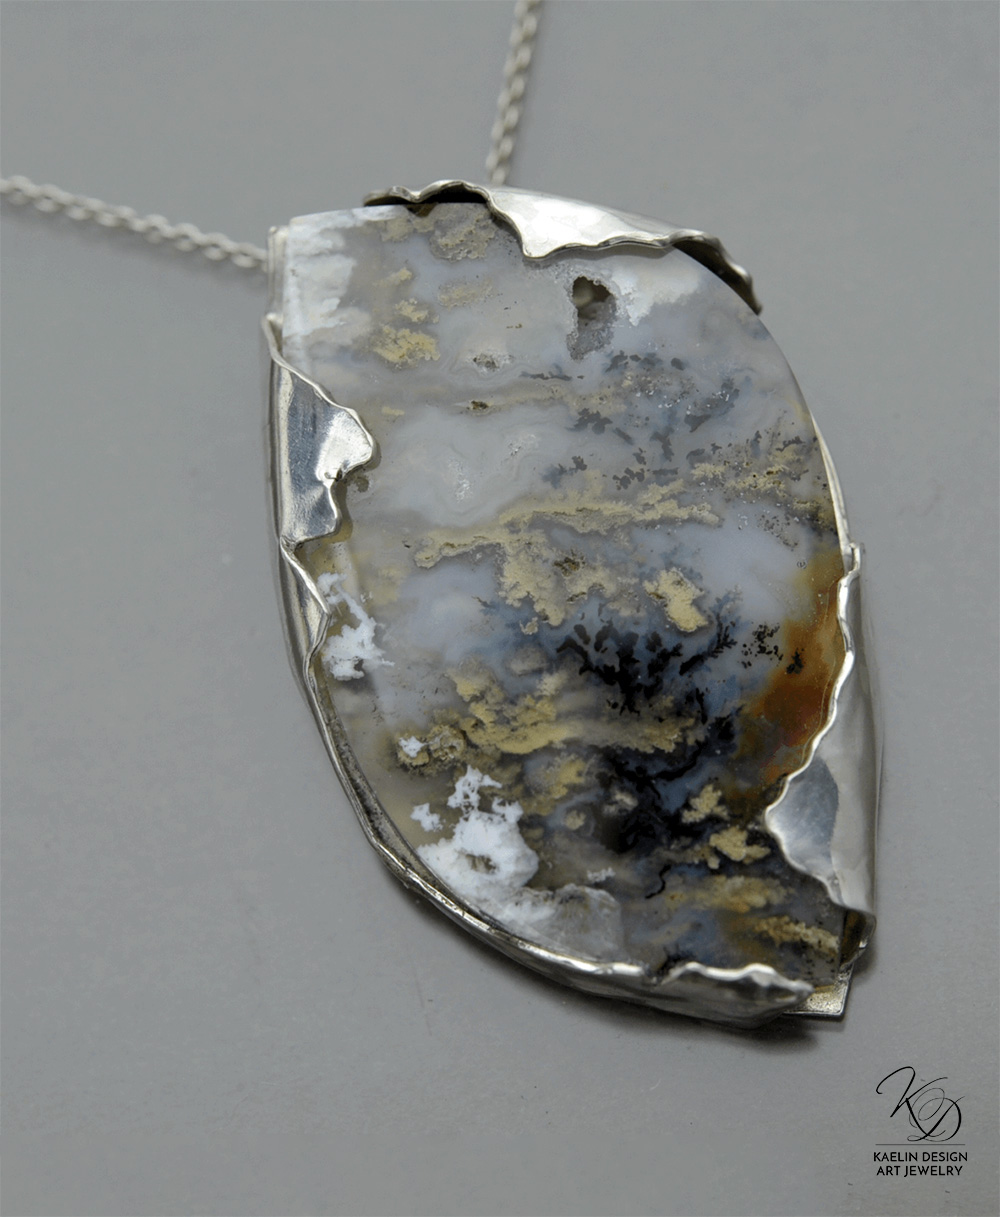 Storm Clouds Hand Forged Sterling Silver and Plume Agate Art Pendant by Kaelin Design